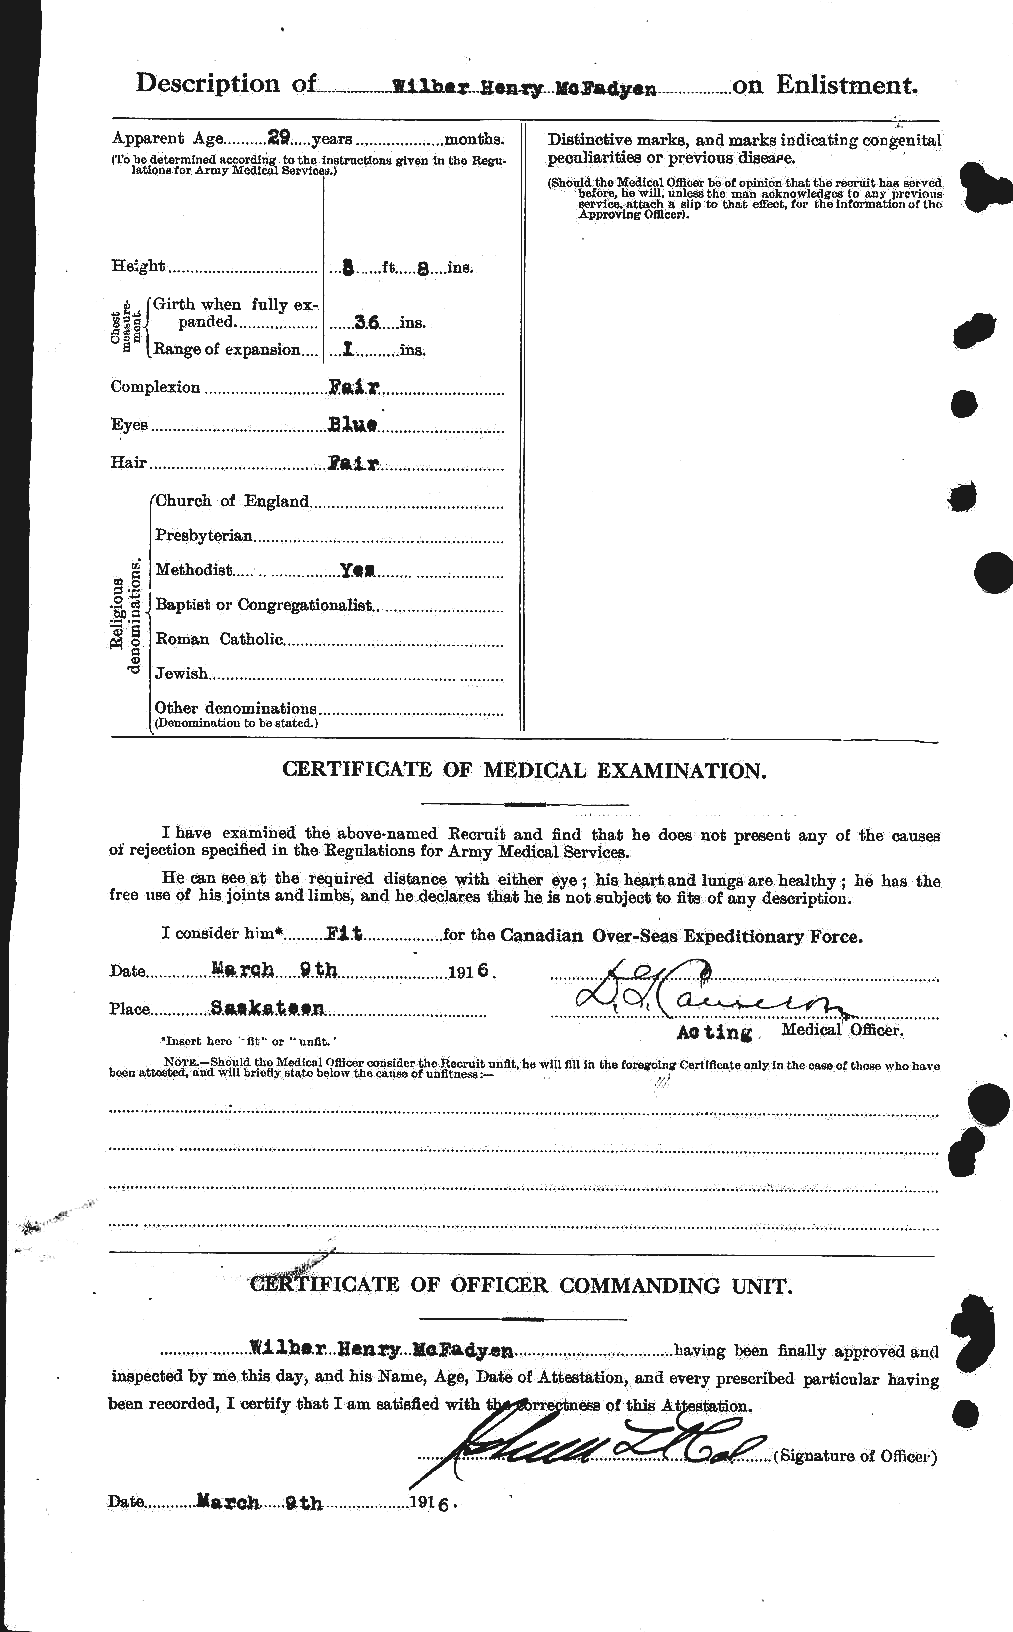 Personnel Records of the First World War - CEF 521219b